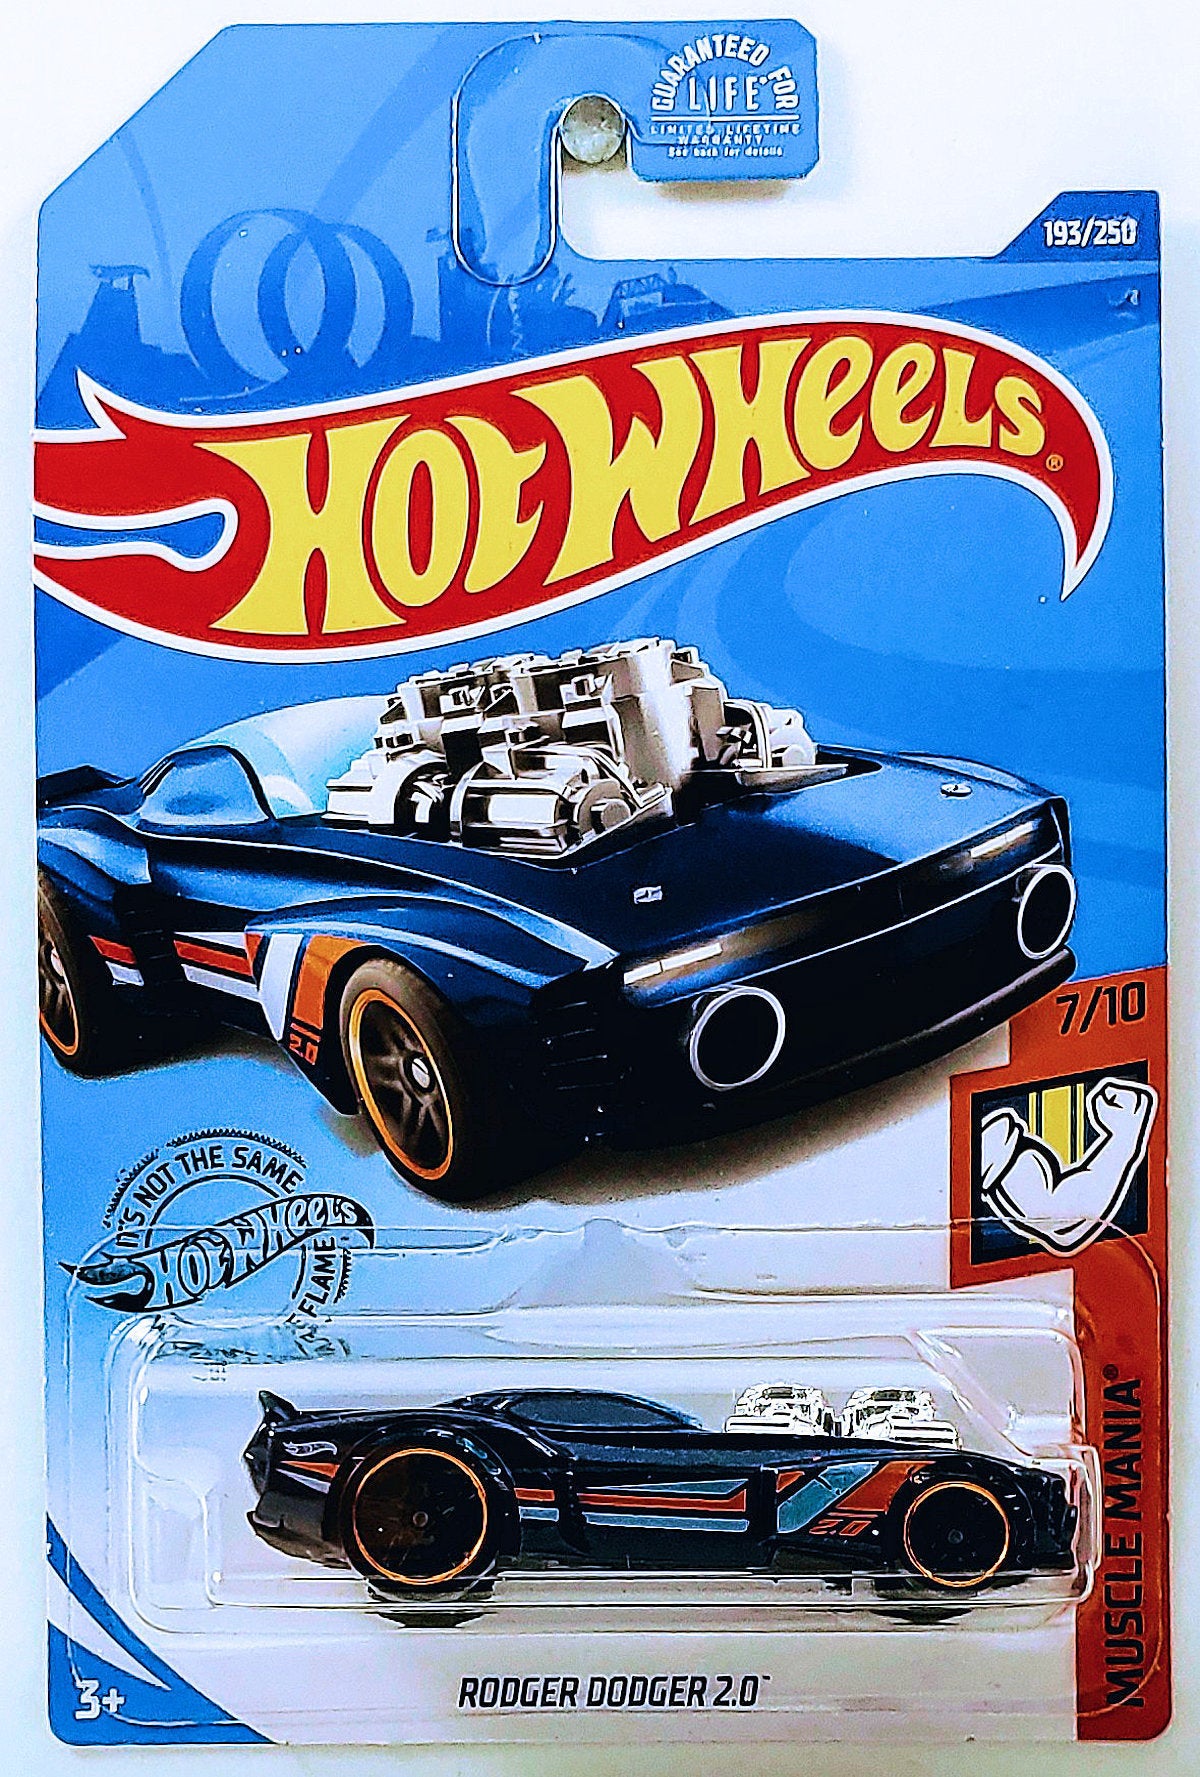 Hot Wheels 2020 - Collector # 193/250 - Muscle Mania 7/10 - Rodger Dodger 2.0 - Blue